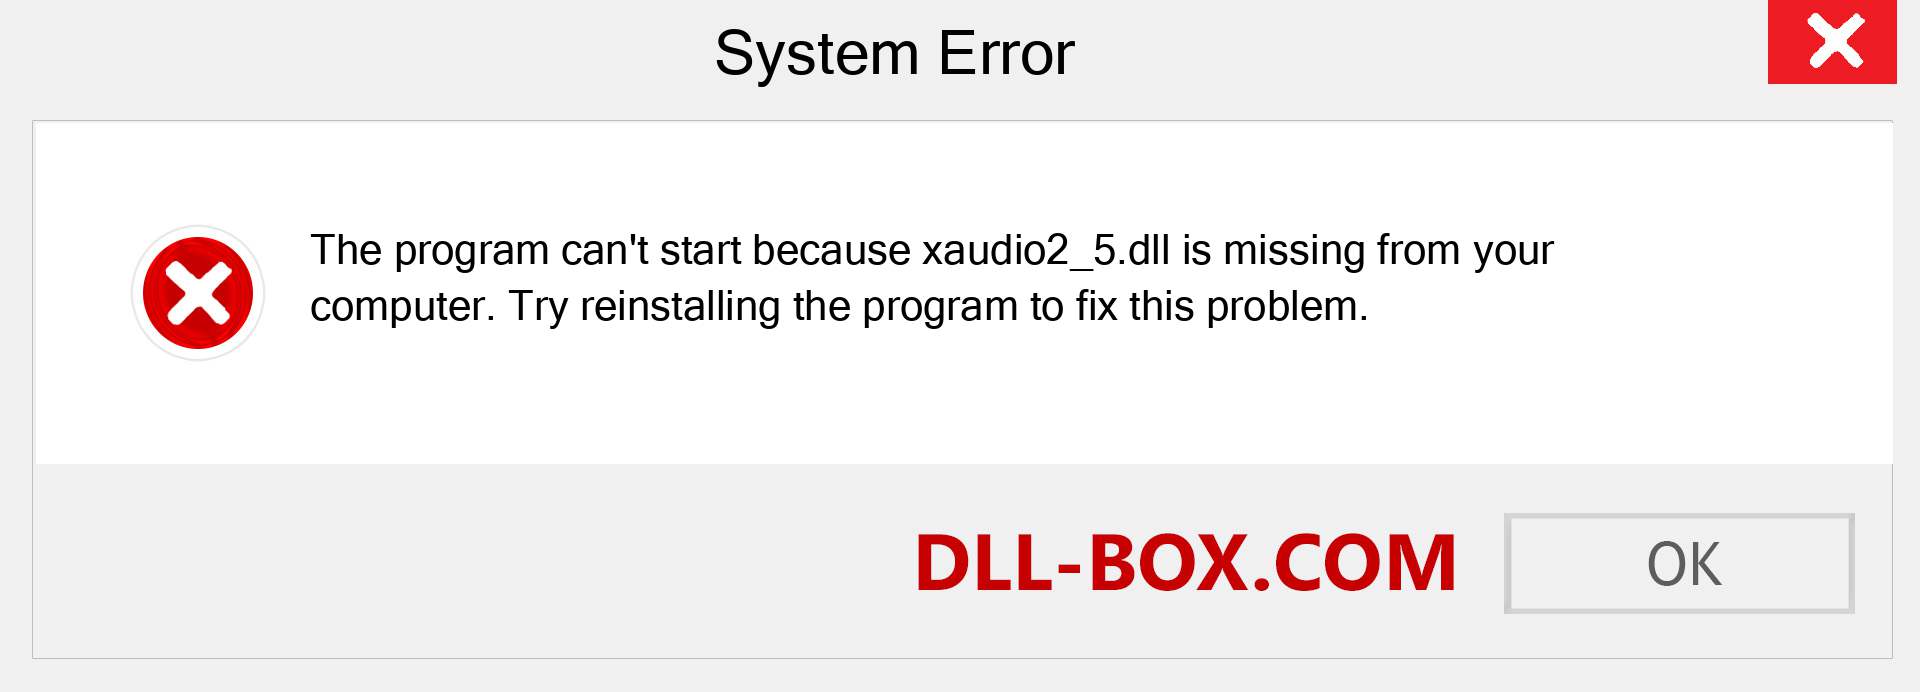  xaudio2_5.dll file is missing?. Download for Windows 7, 8, 10 - Fix  xaudio2_5 dll Missing Error on Windows, photos, images